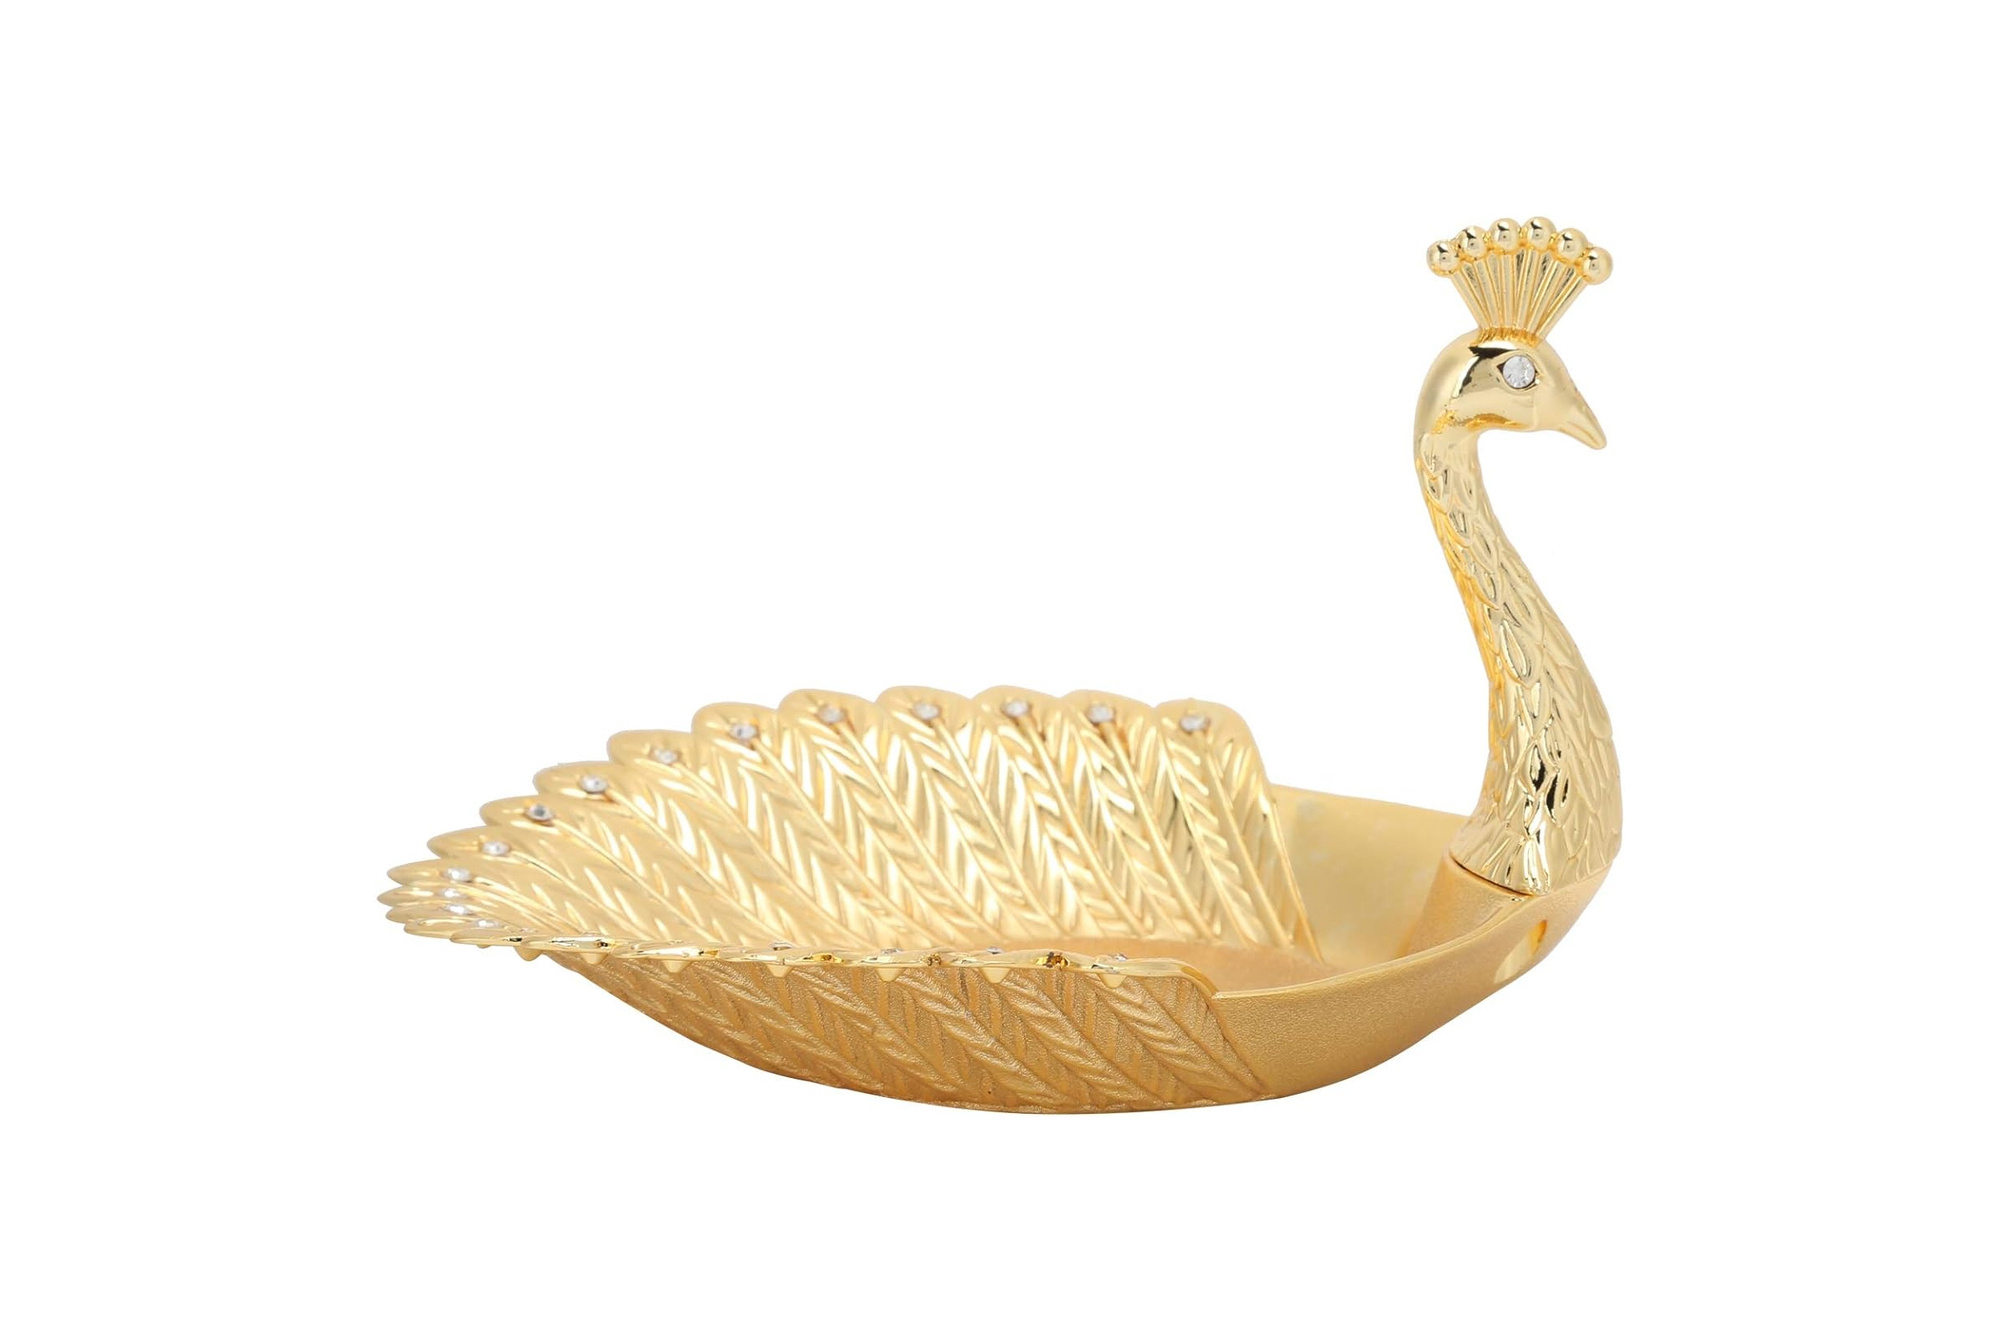 Gold peacock decorative plate